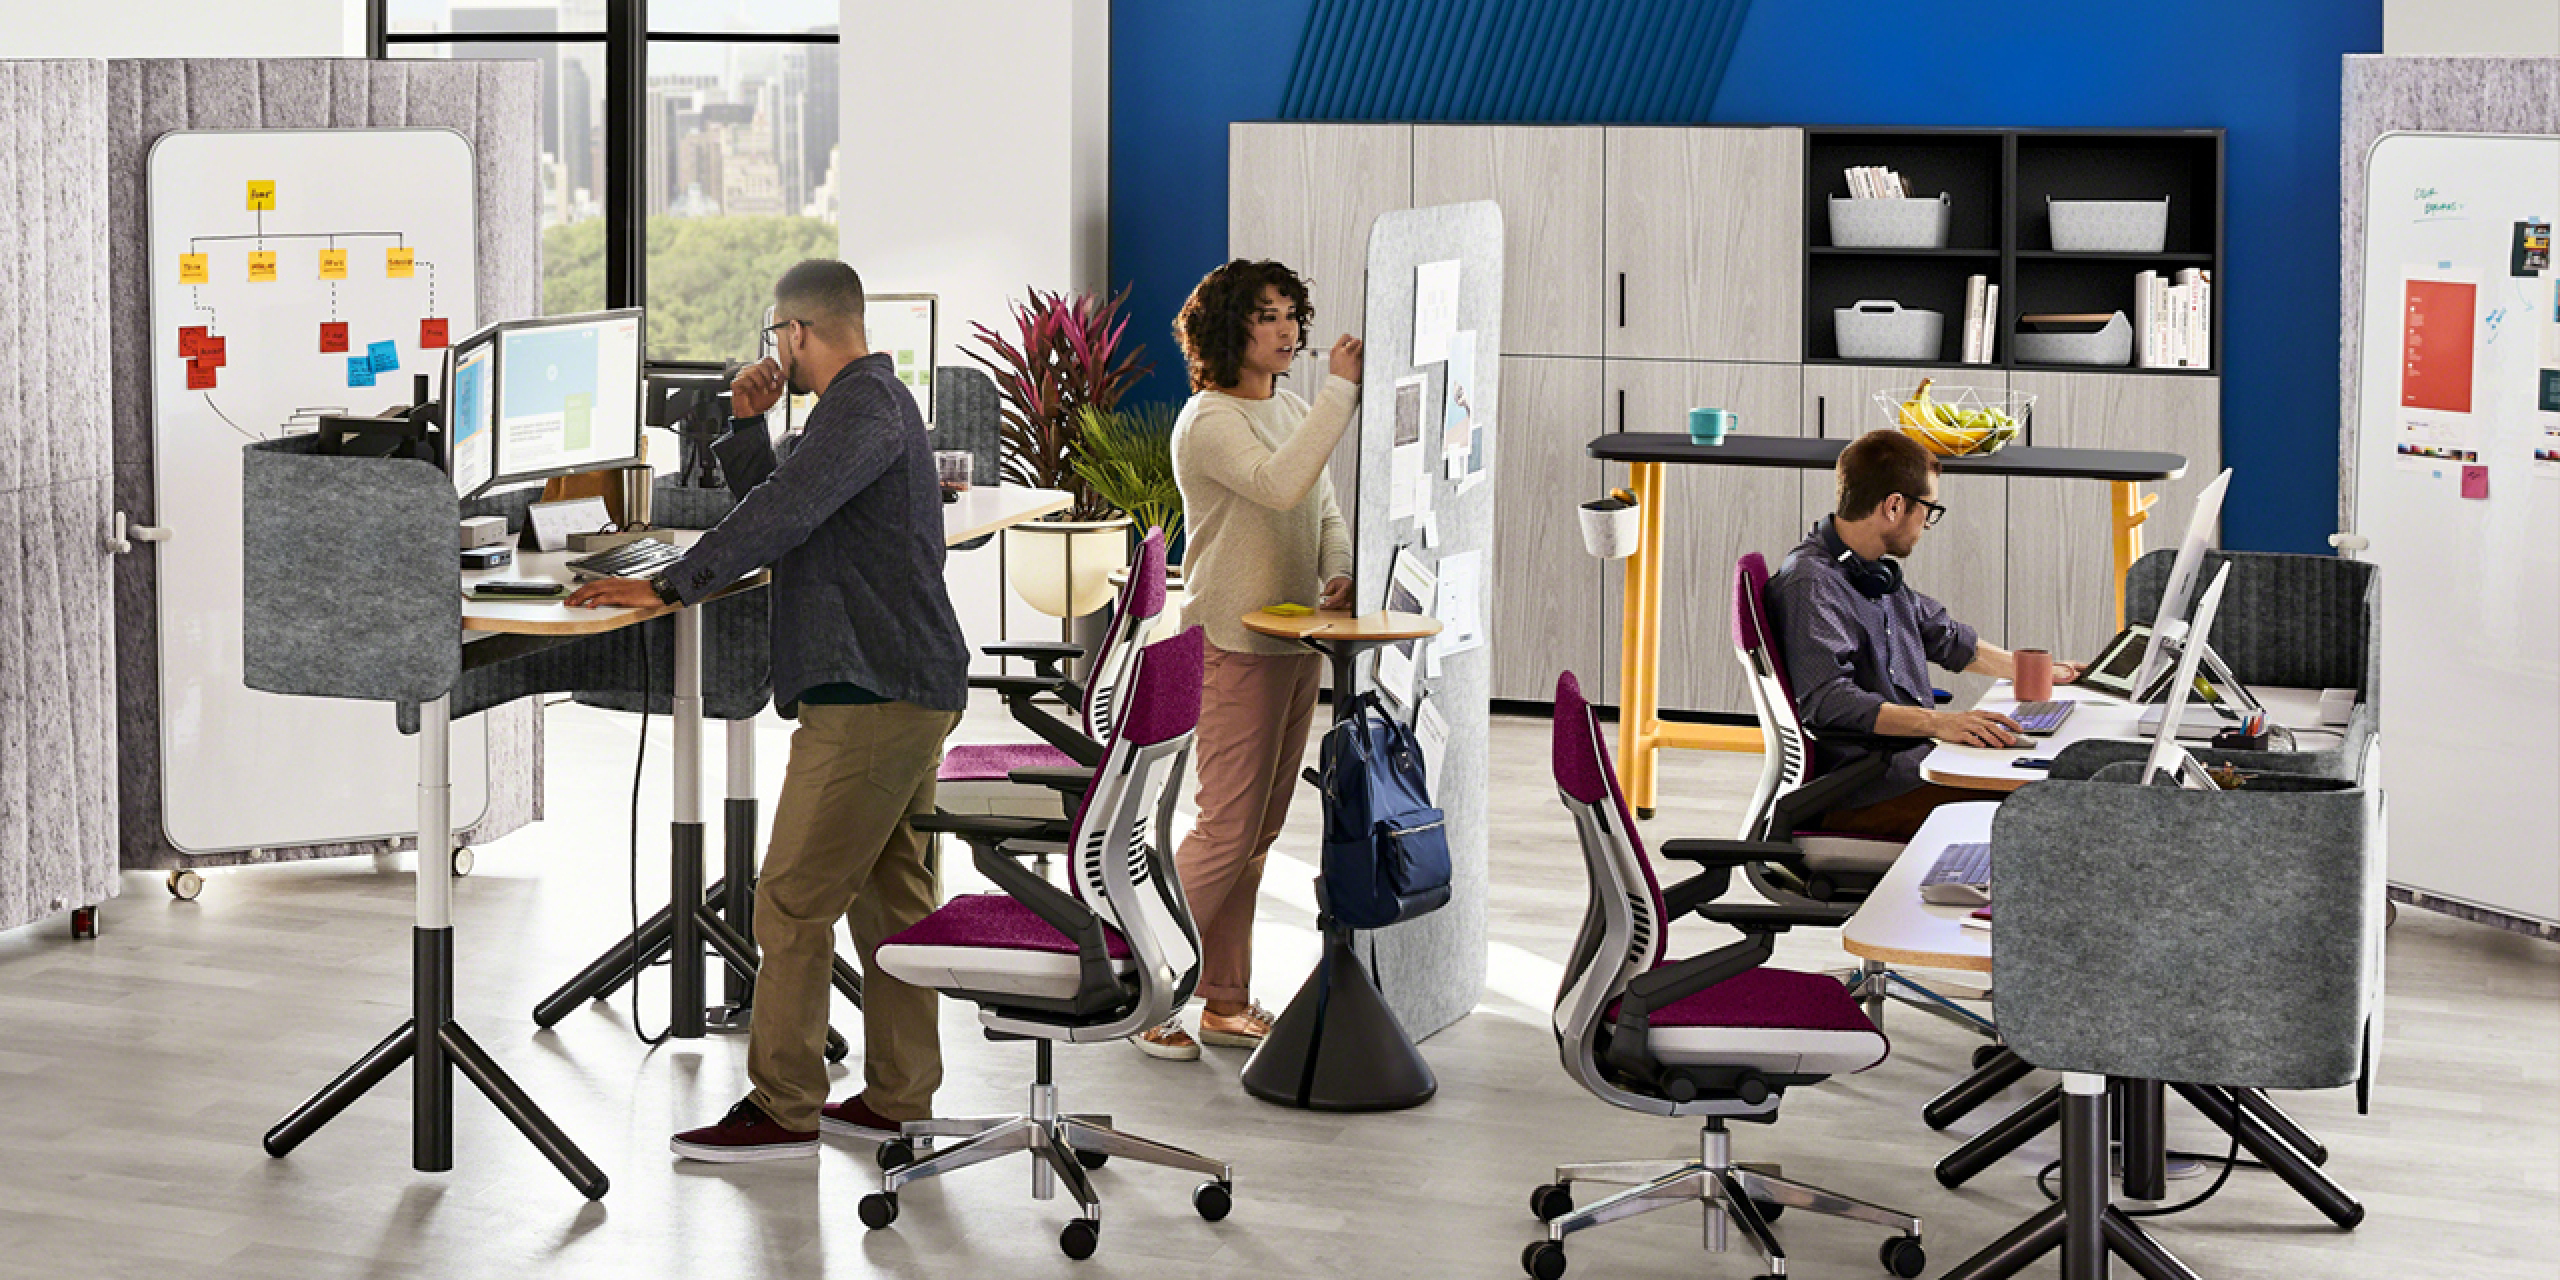 Steelcase Survey: Most Office Workers in Pain Due to Office Chairs -  DBusiness Magazine